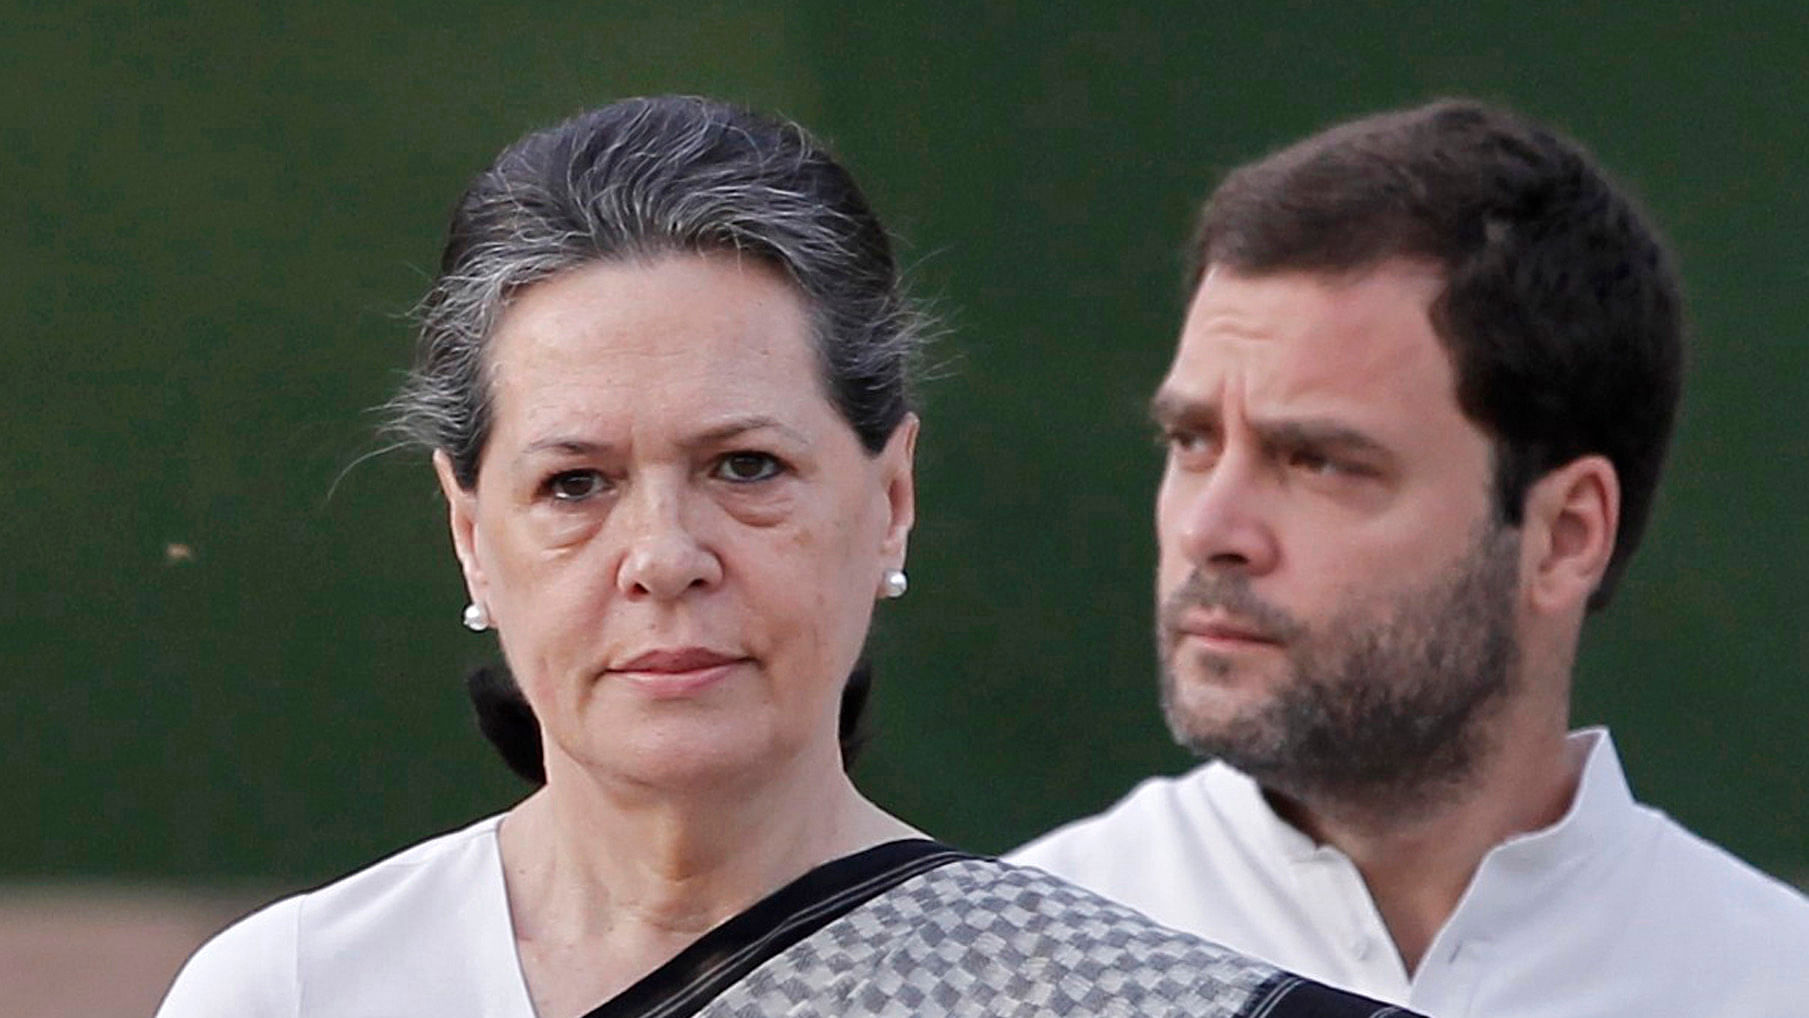 Congress president Sonia Gandhi urged the government to ramp up its strategy to tackle the second wave of the pandemic that India is facing now.